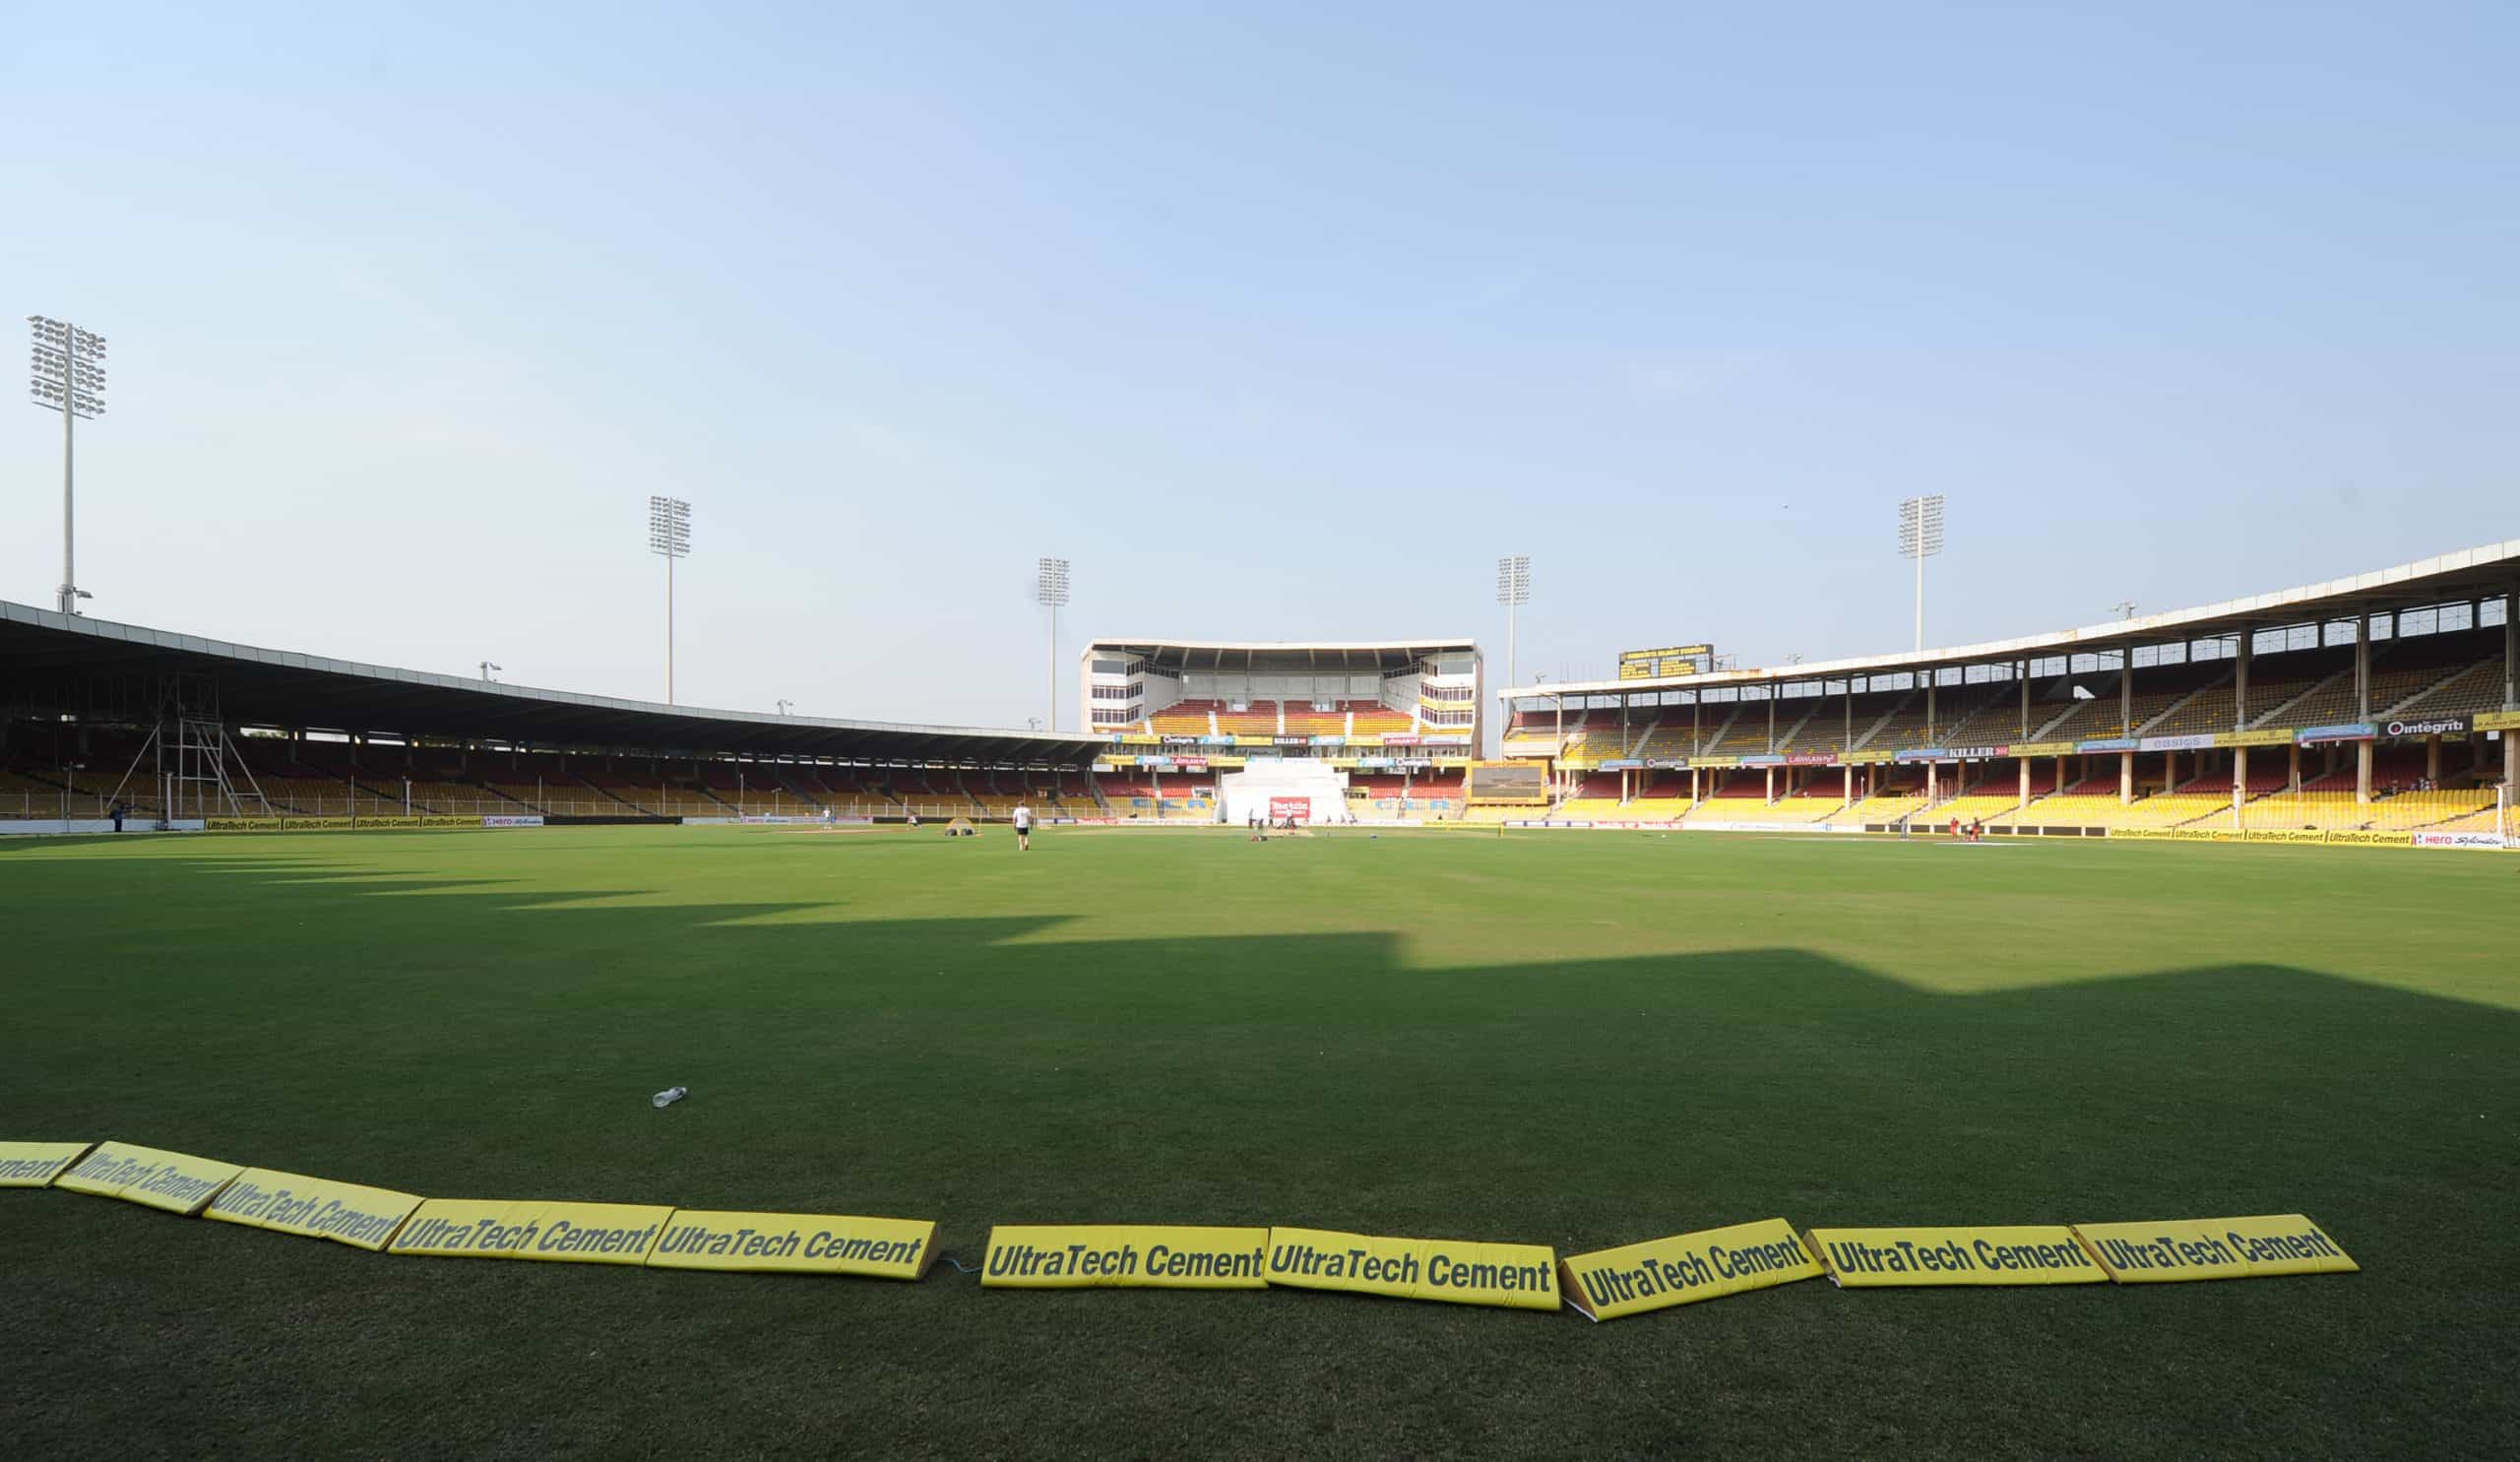 IPL suspended as India’s coronavirus crisis spirals out of control